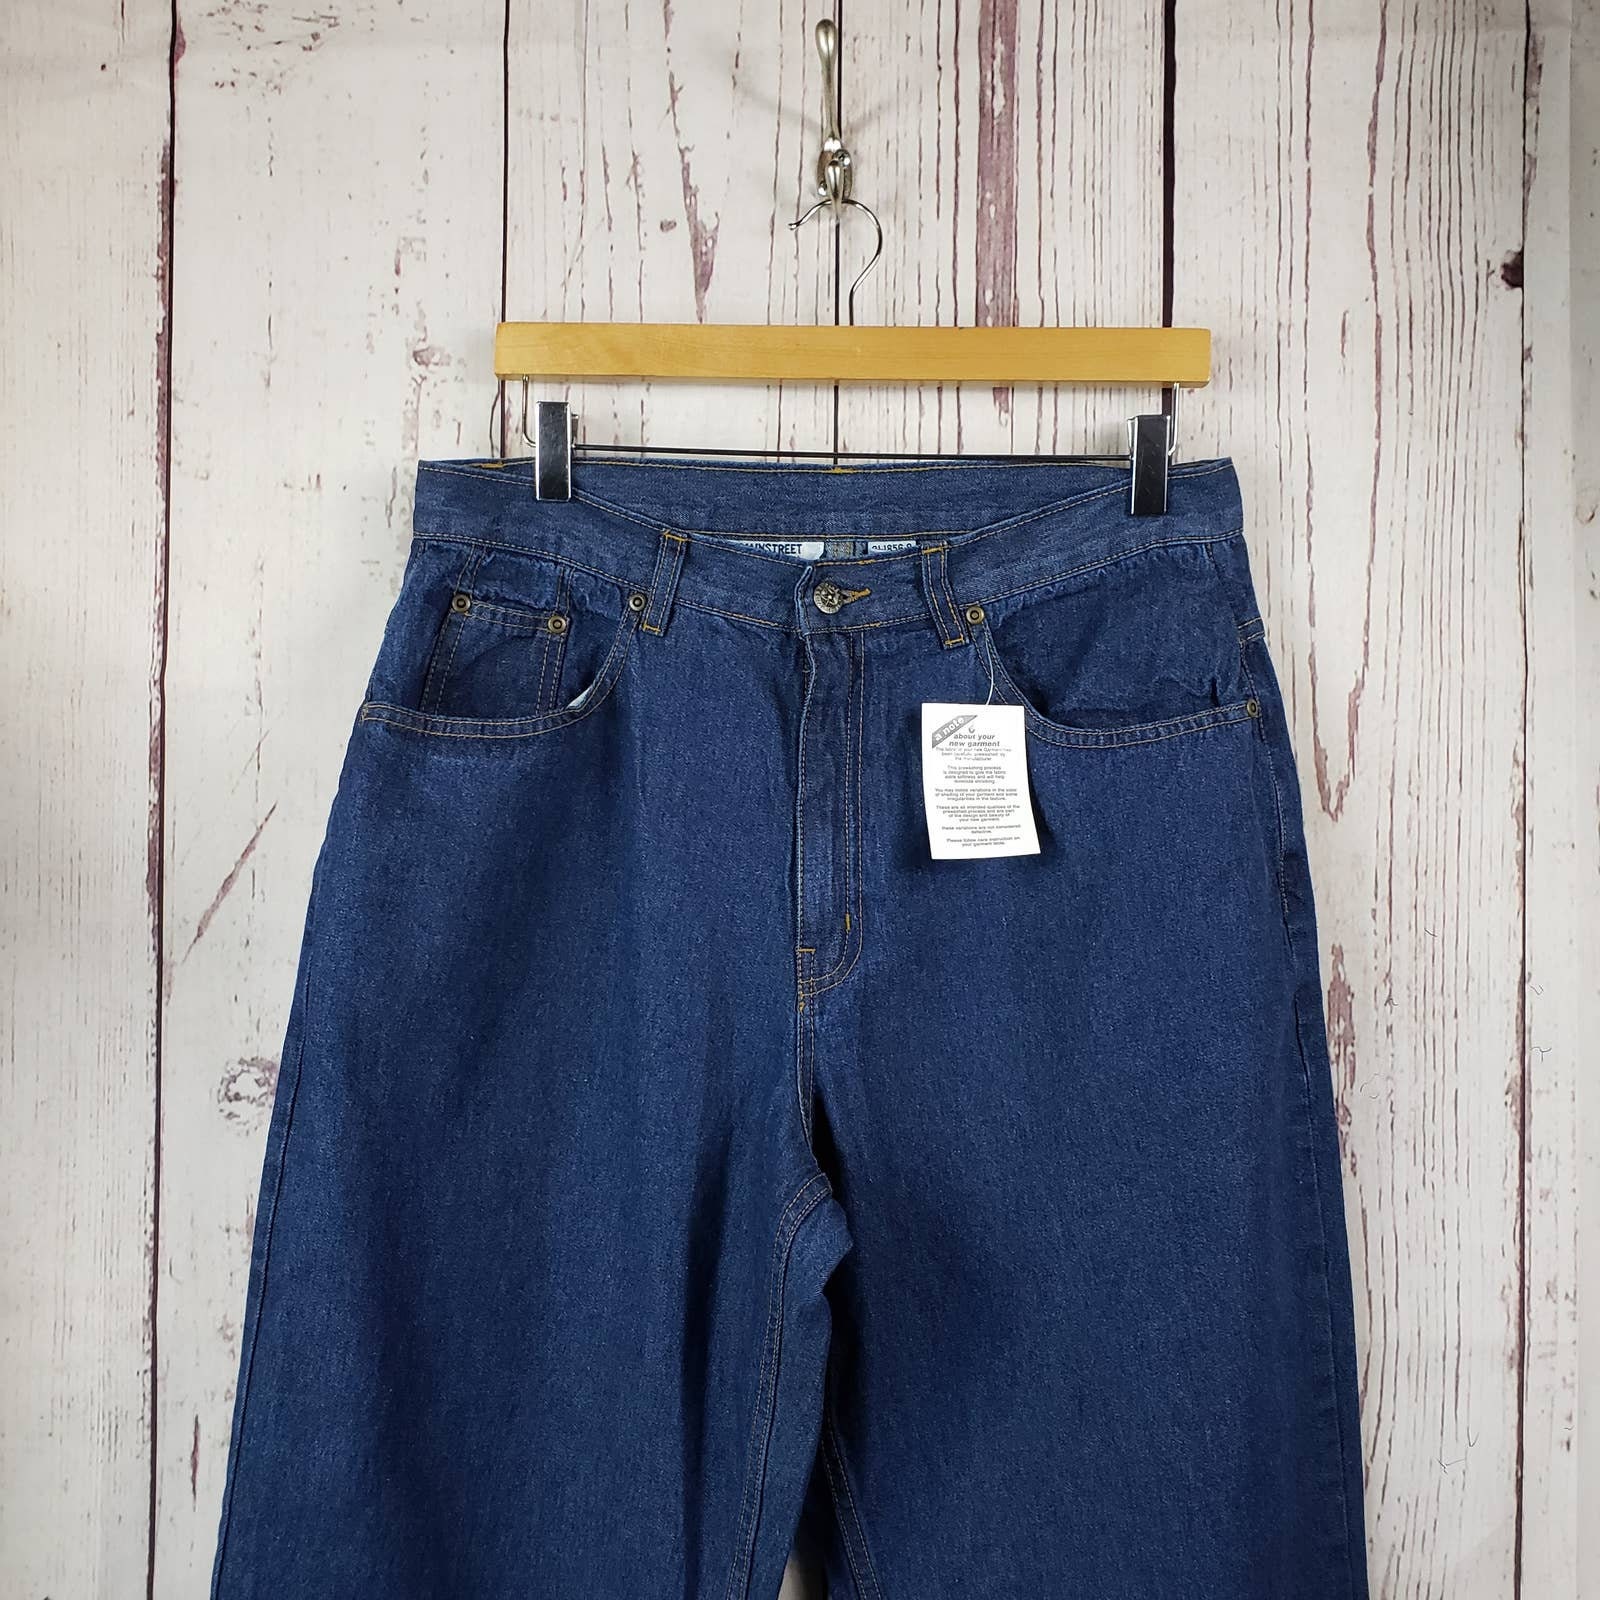 Commercials We Love: Duluth Trading Company's Ball Room Jeans